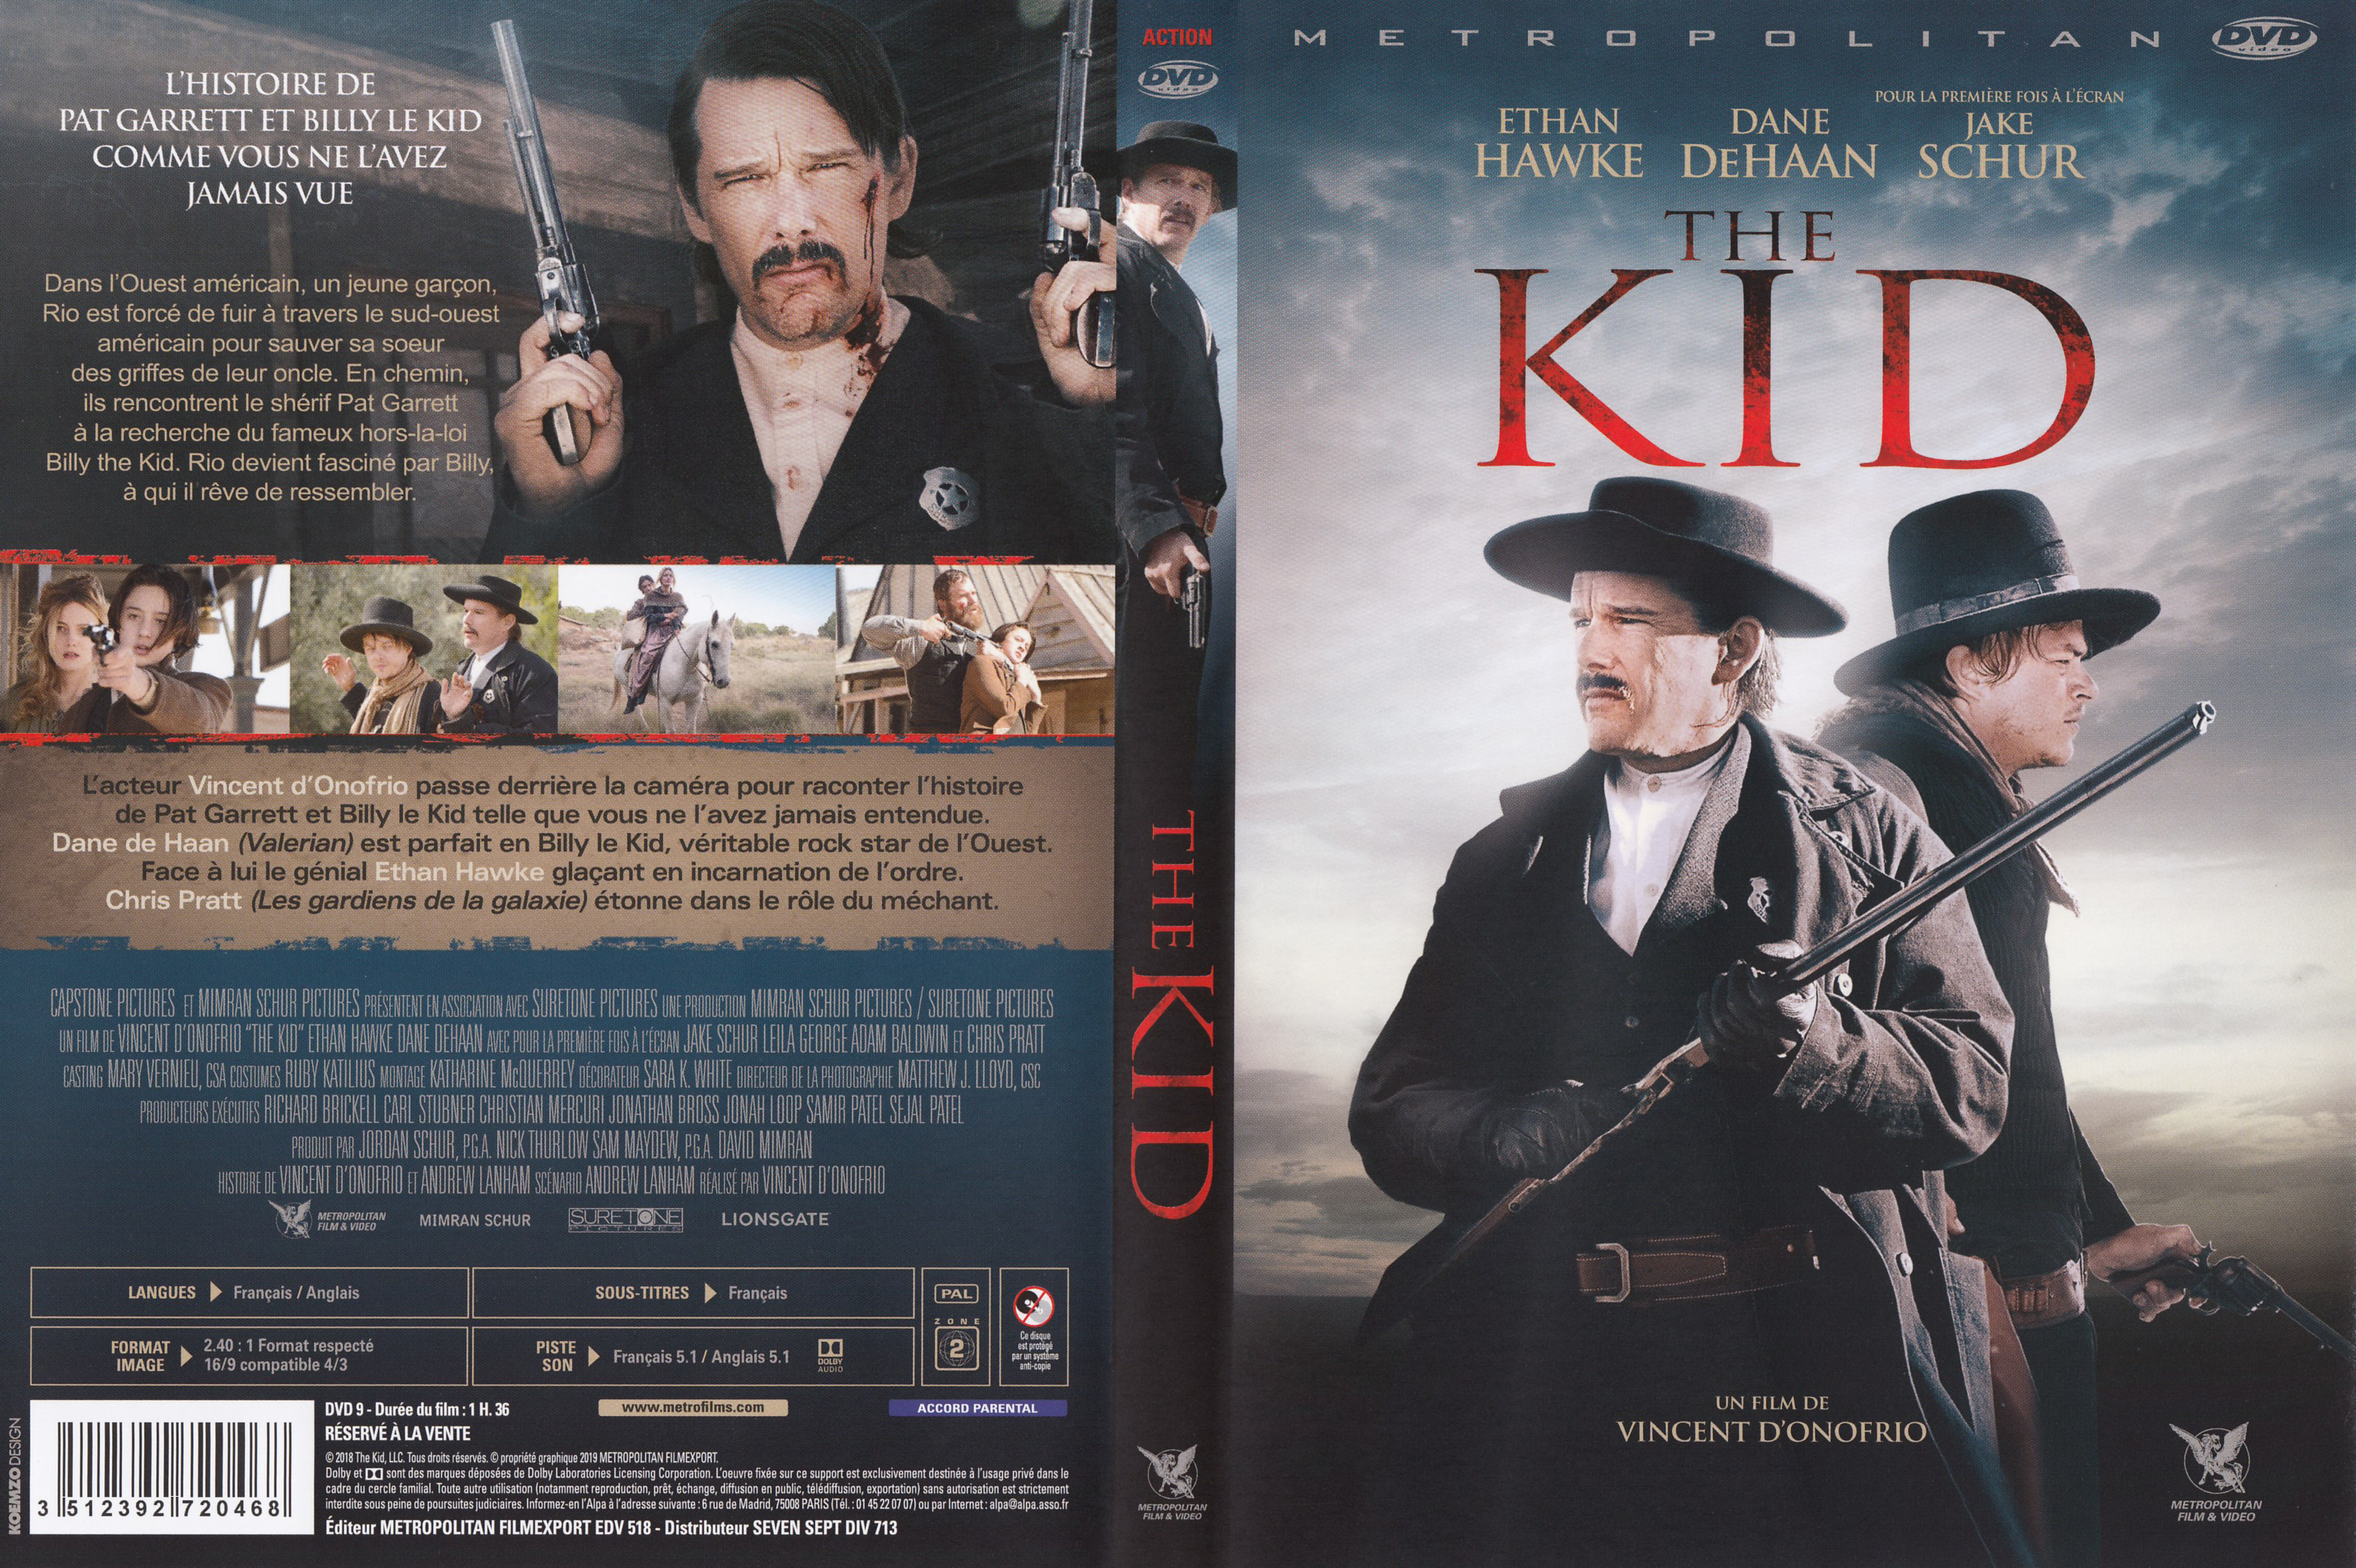 Jaquette DVD The kid (2018)